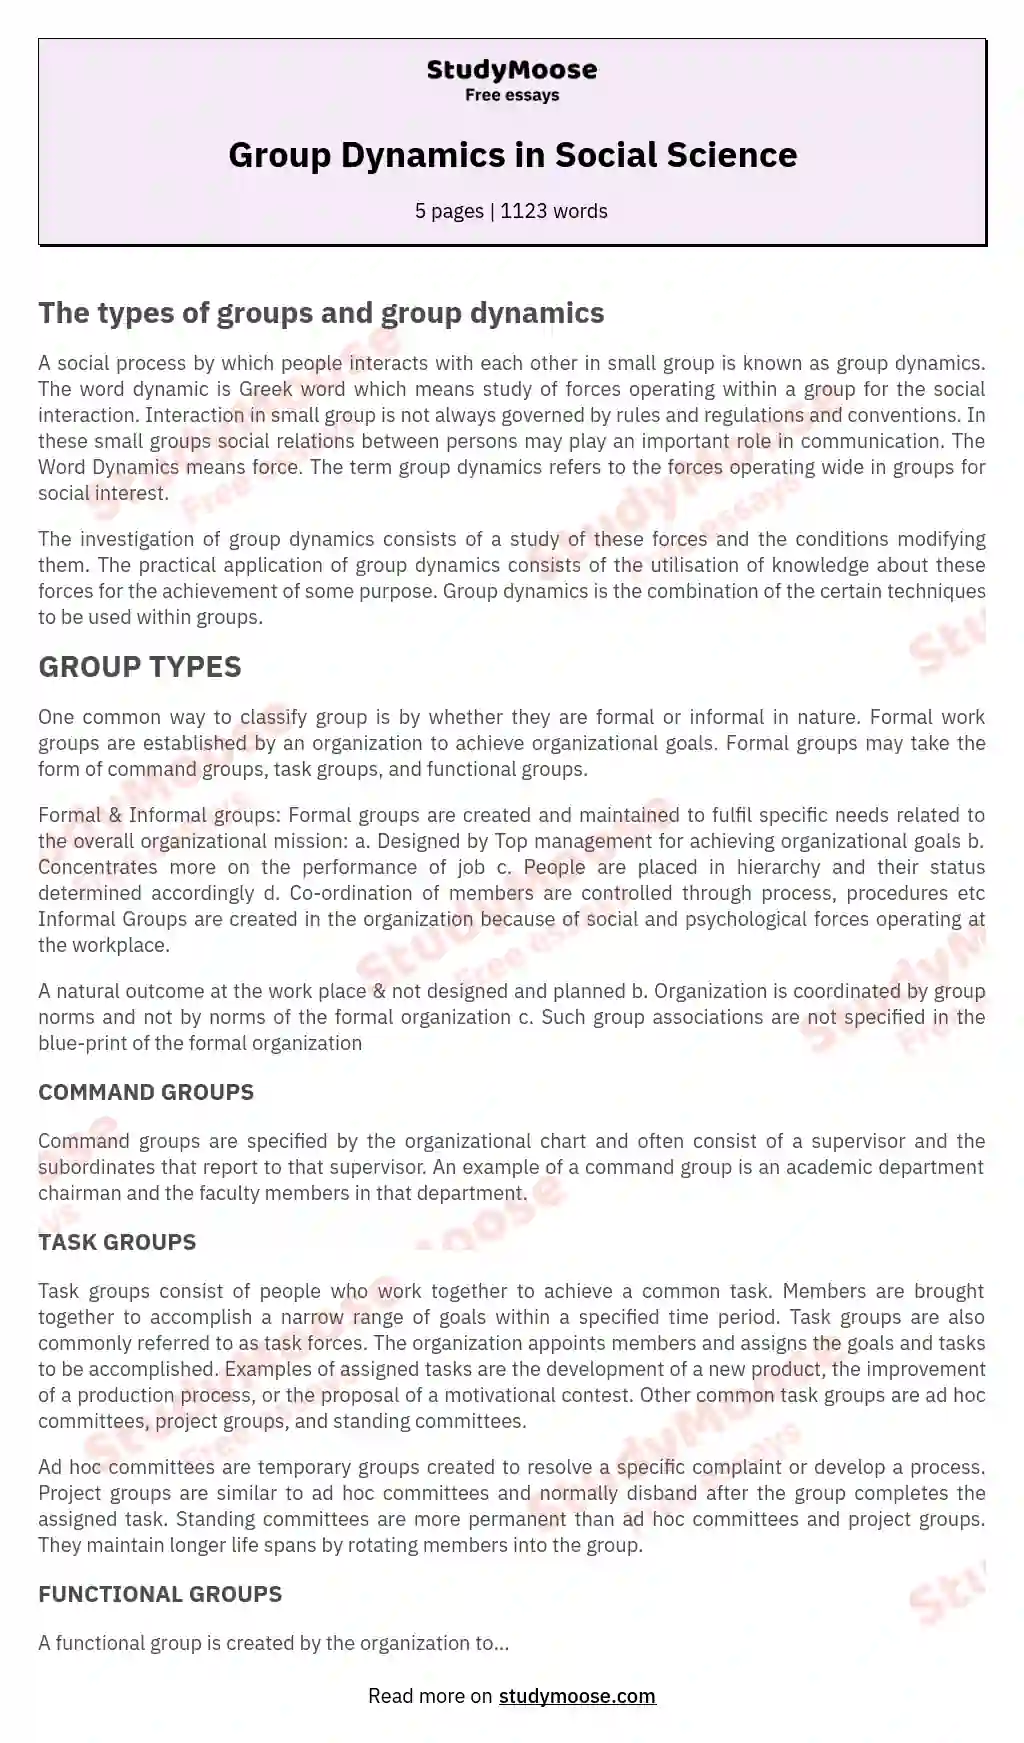 Group Dynamics in Social Science essay